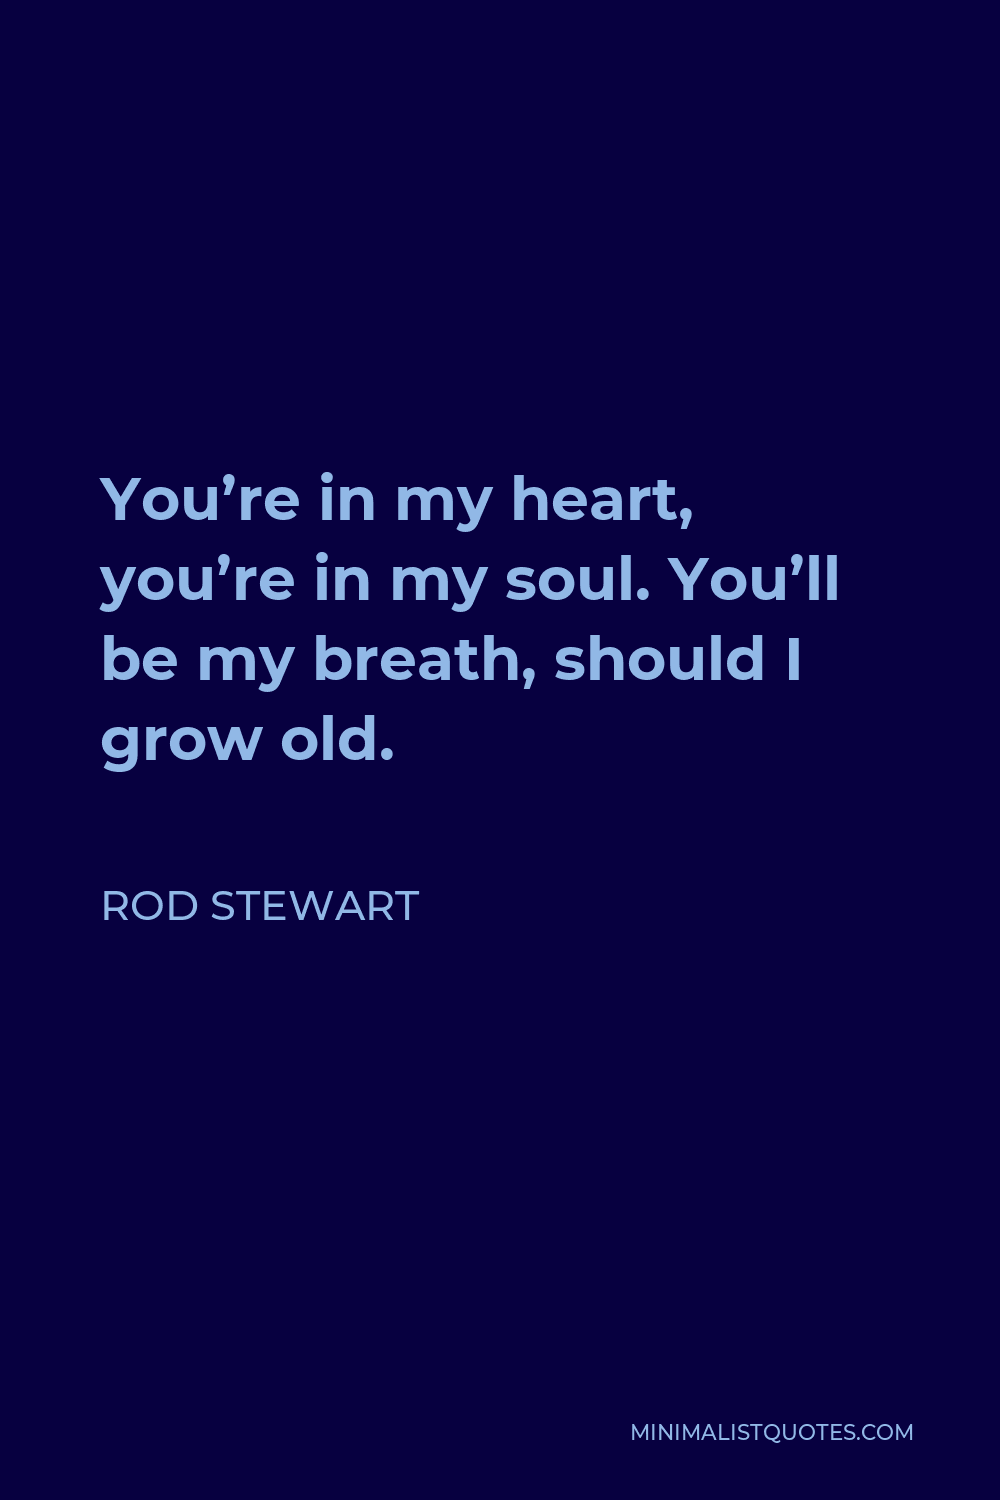 Rod Stewart Quote - You’re in my heart, you’re in my soul. You’ll be my breath, should I grow old.